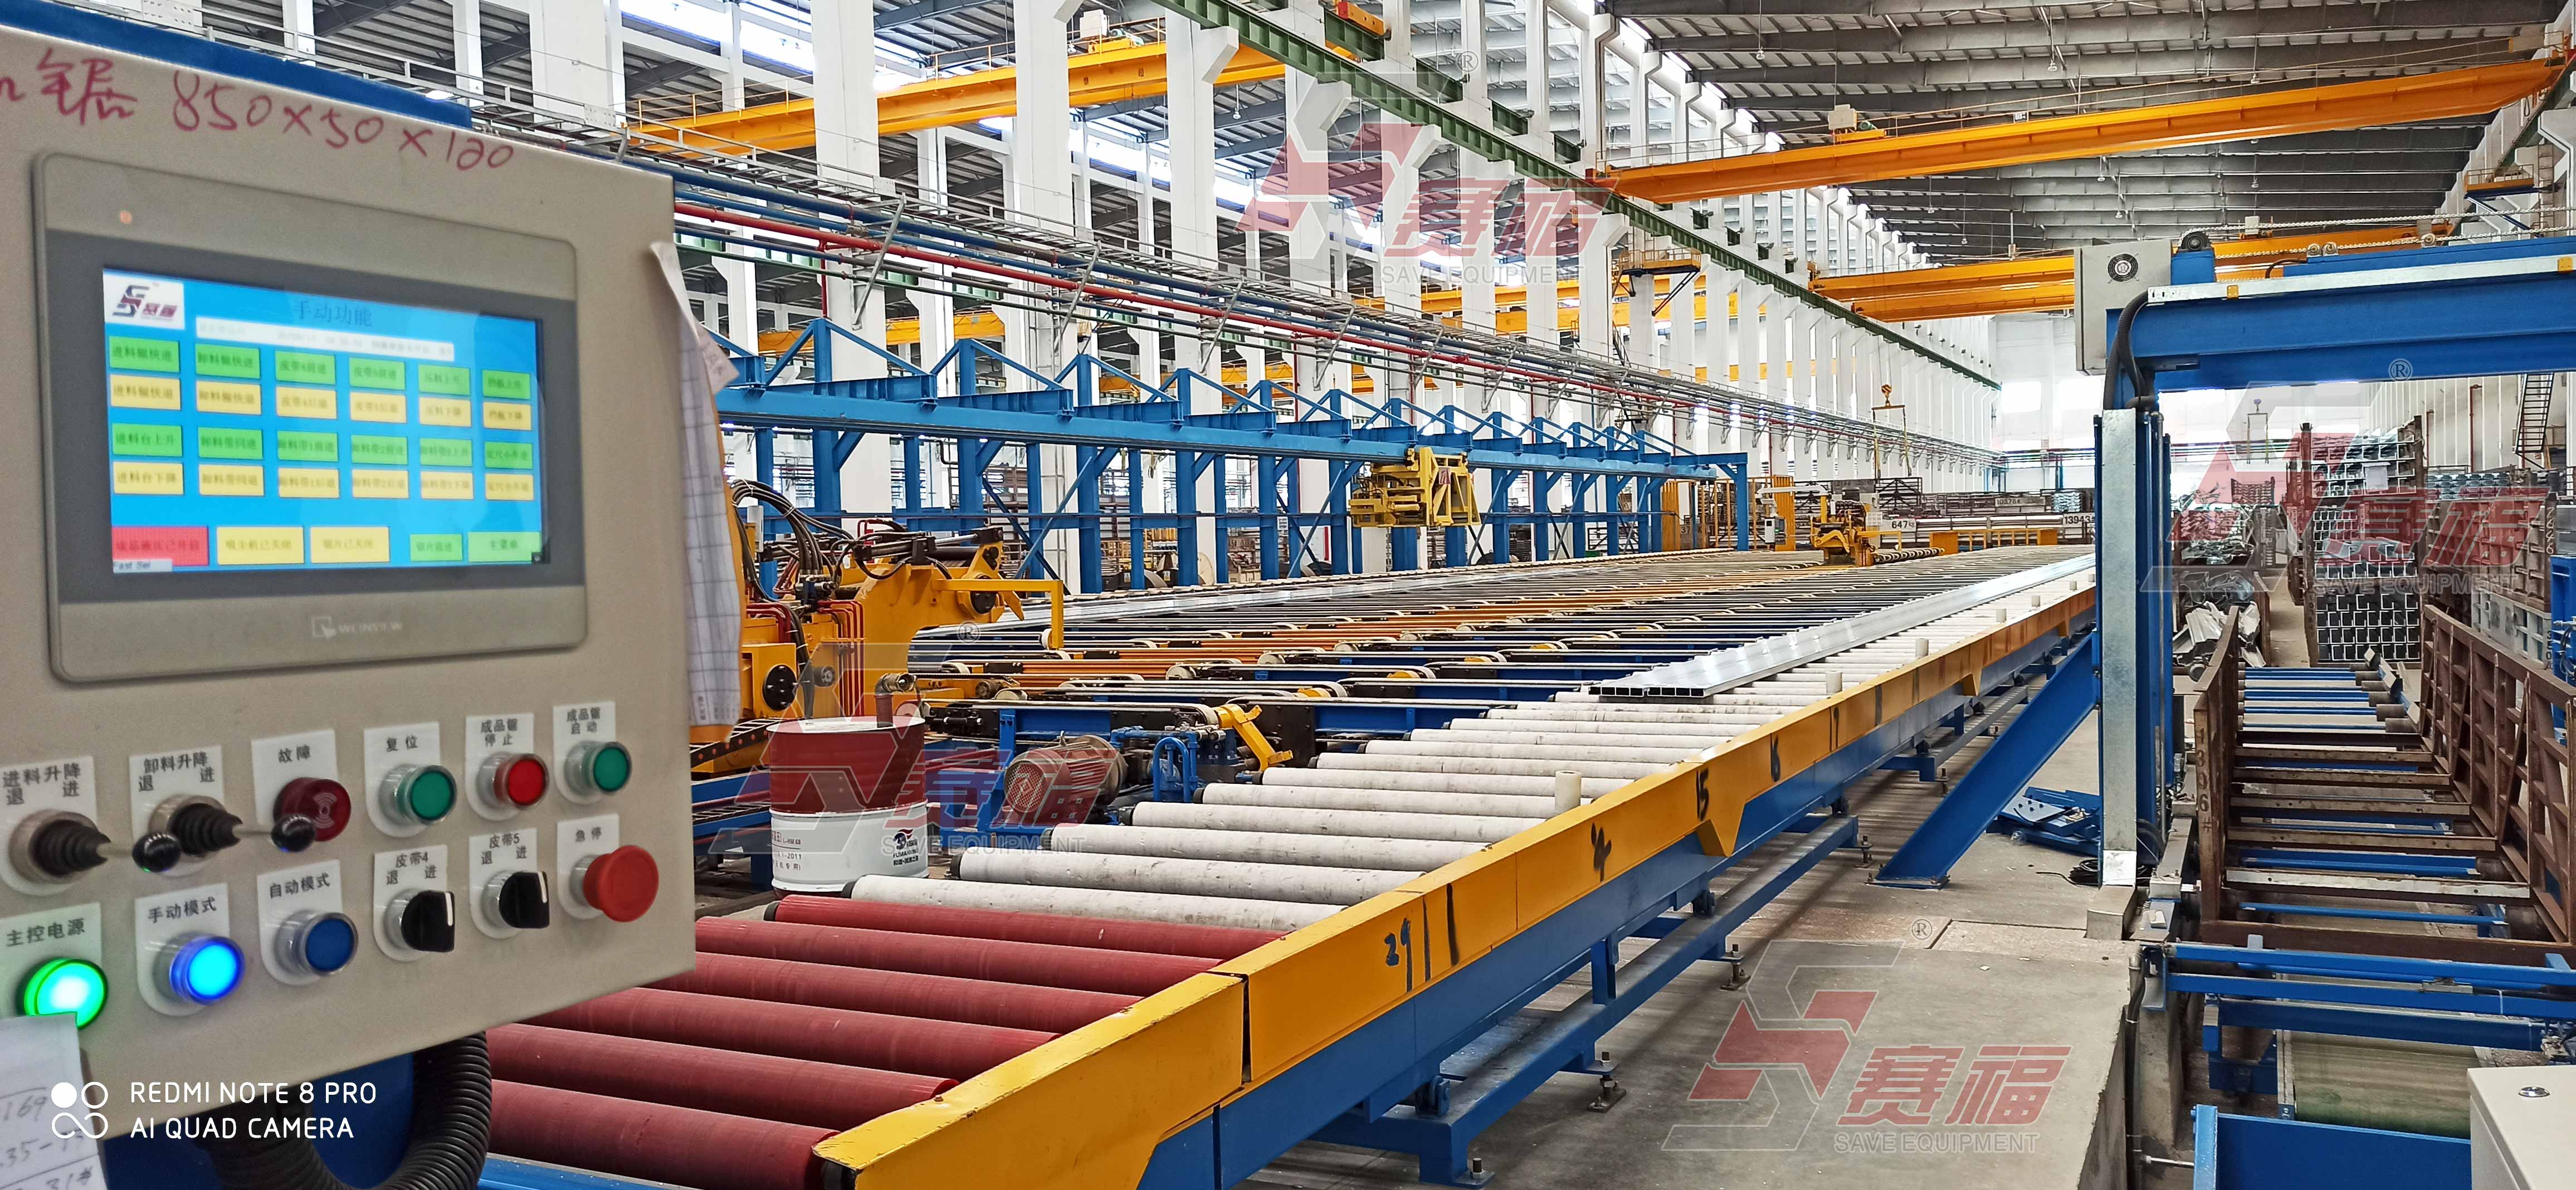 Guangxi Alnan Aluminium Co.,Ltd. ordered whole sets of automatic correcting die system from us